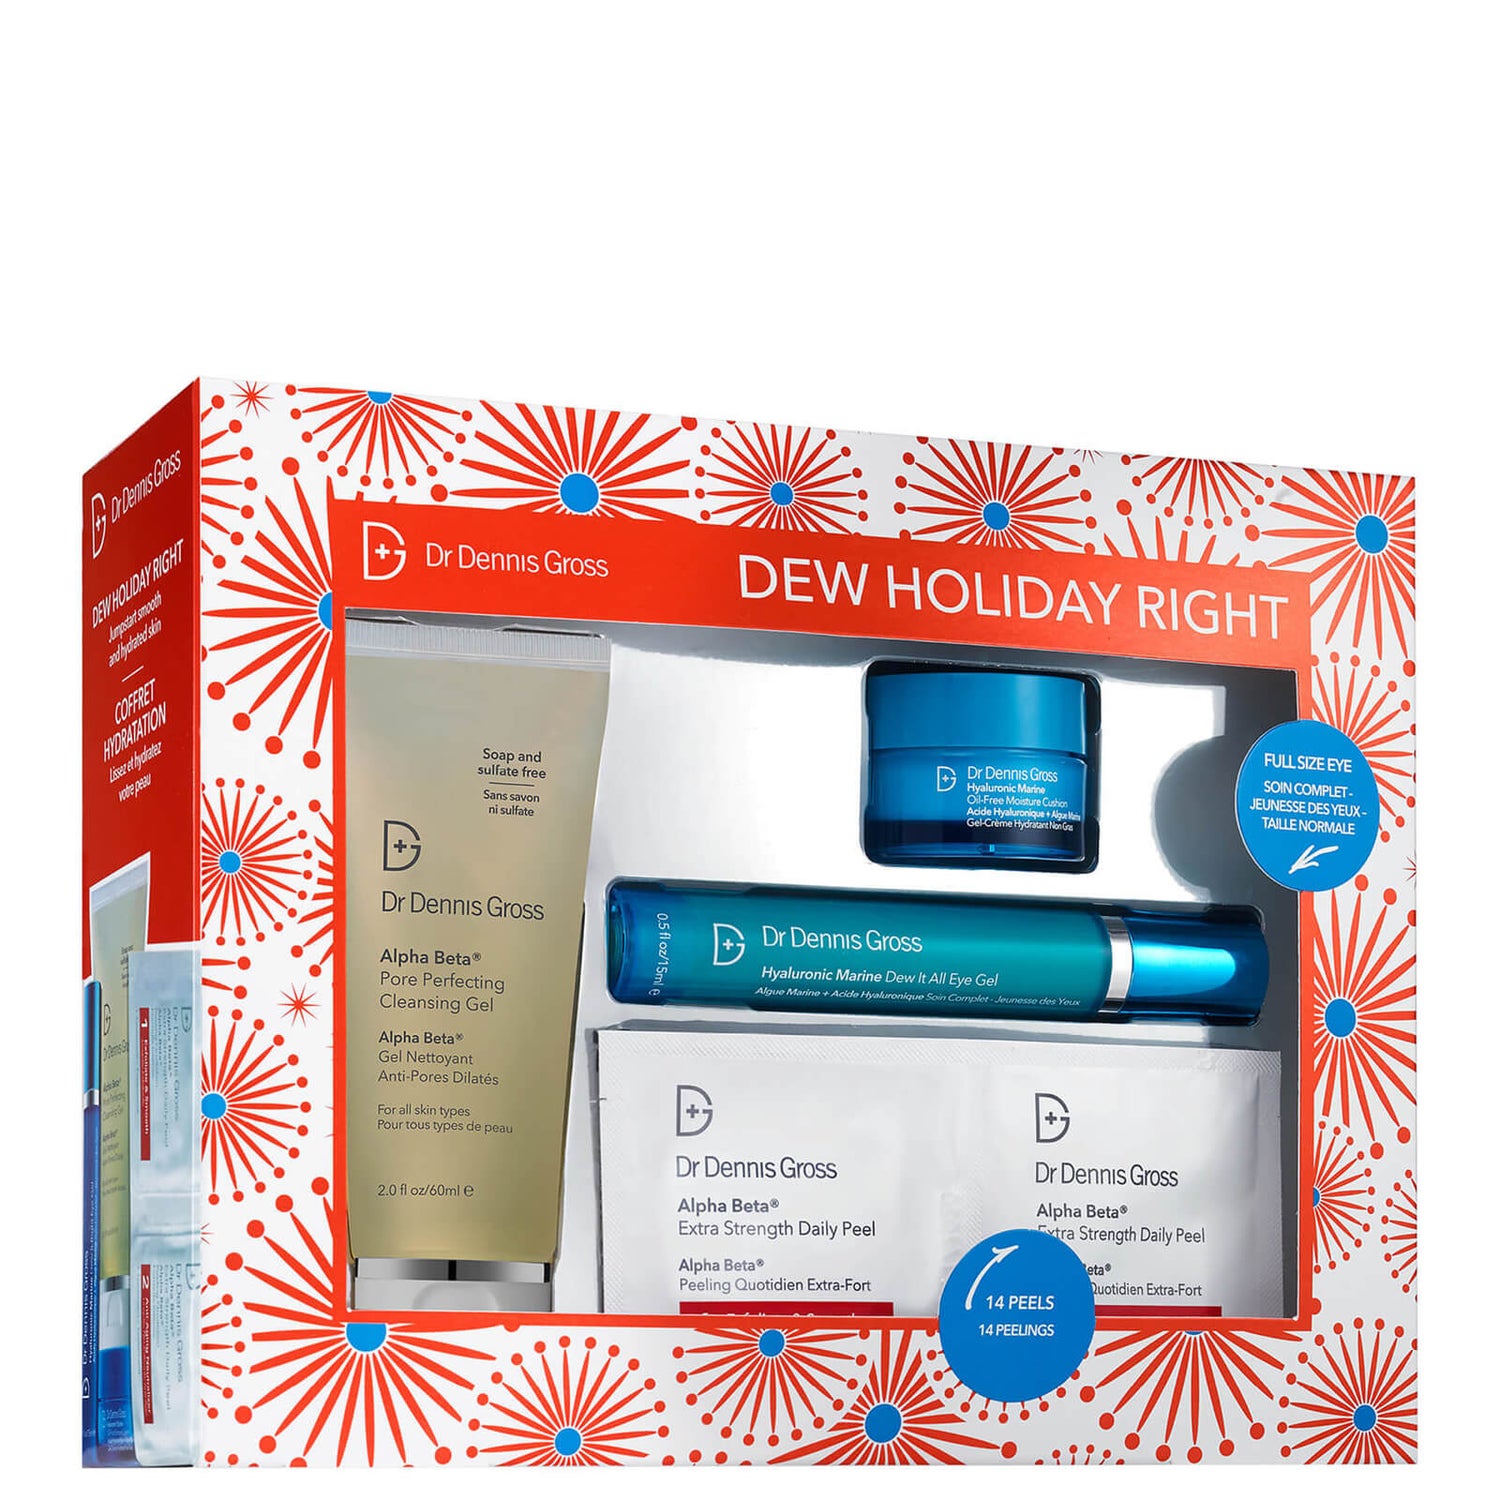 Dr Dennis Gross Dew Holiday Right (Worth $123.00)